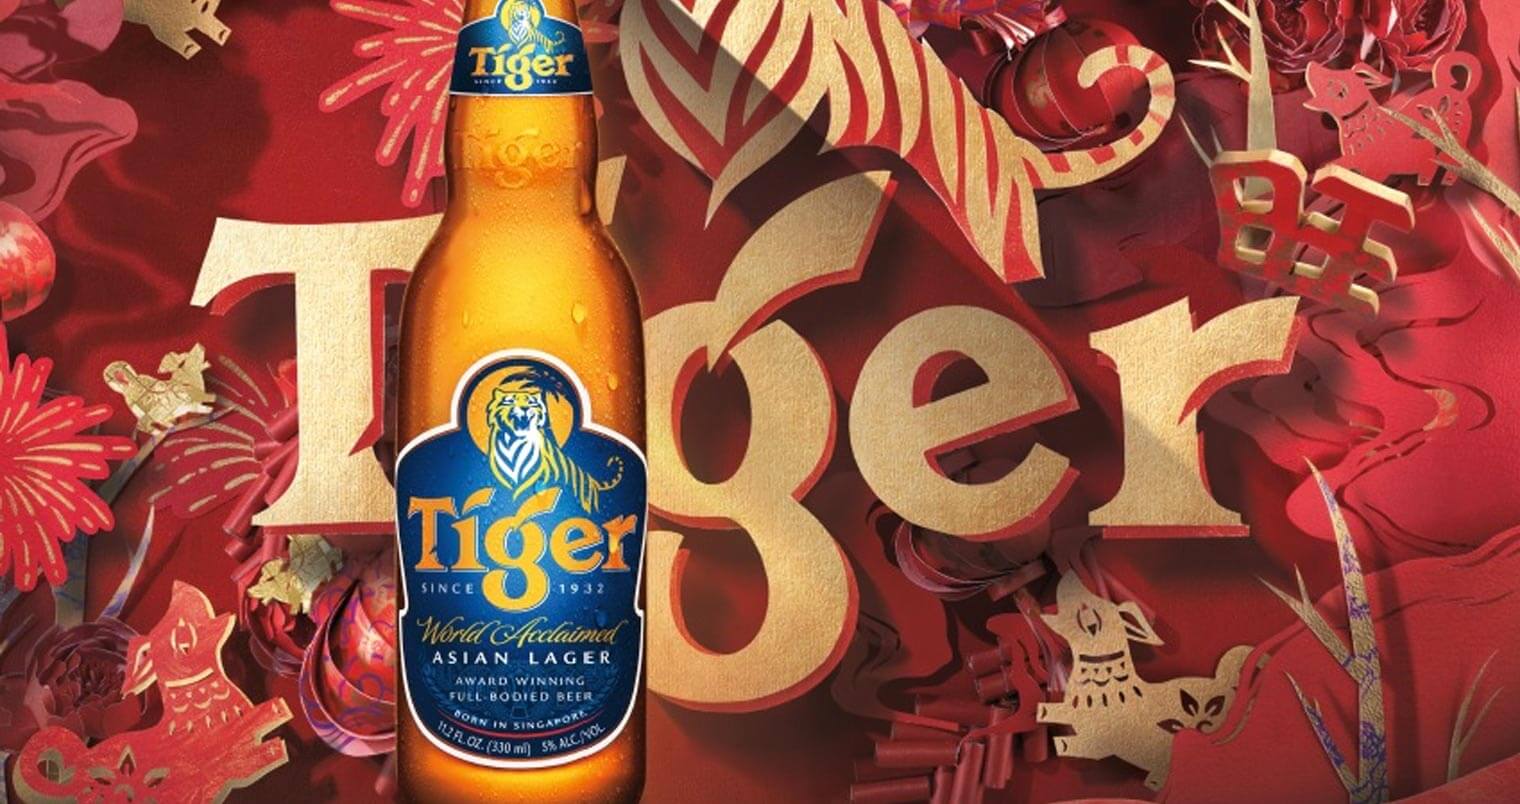 Tiger Beer Program Uncages 2018 Lunar New Year Celebrations, featured image